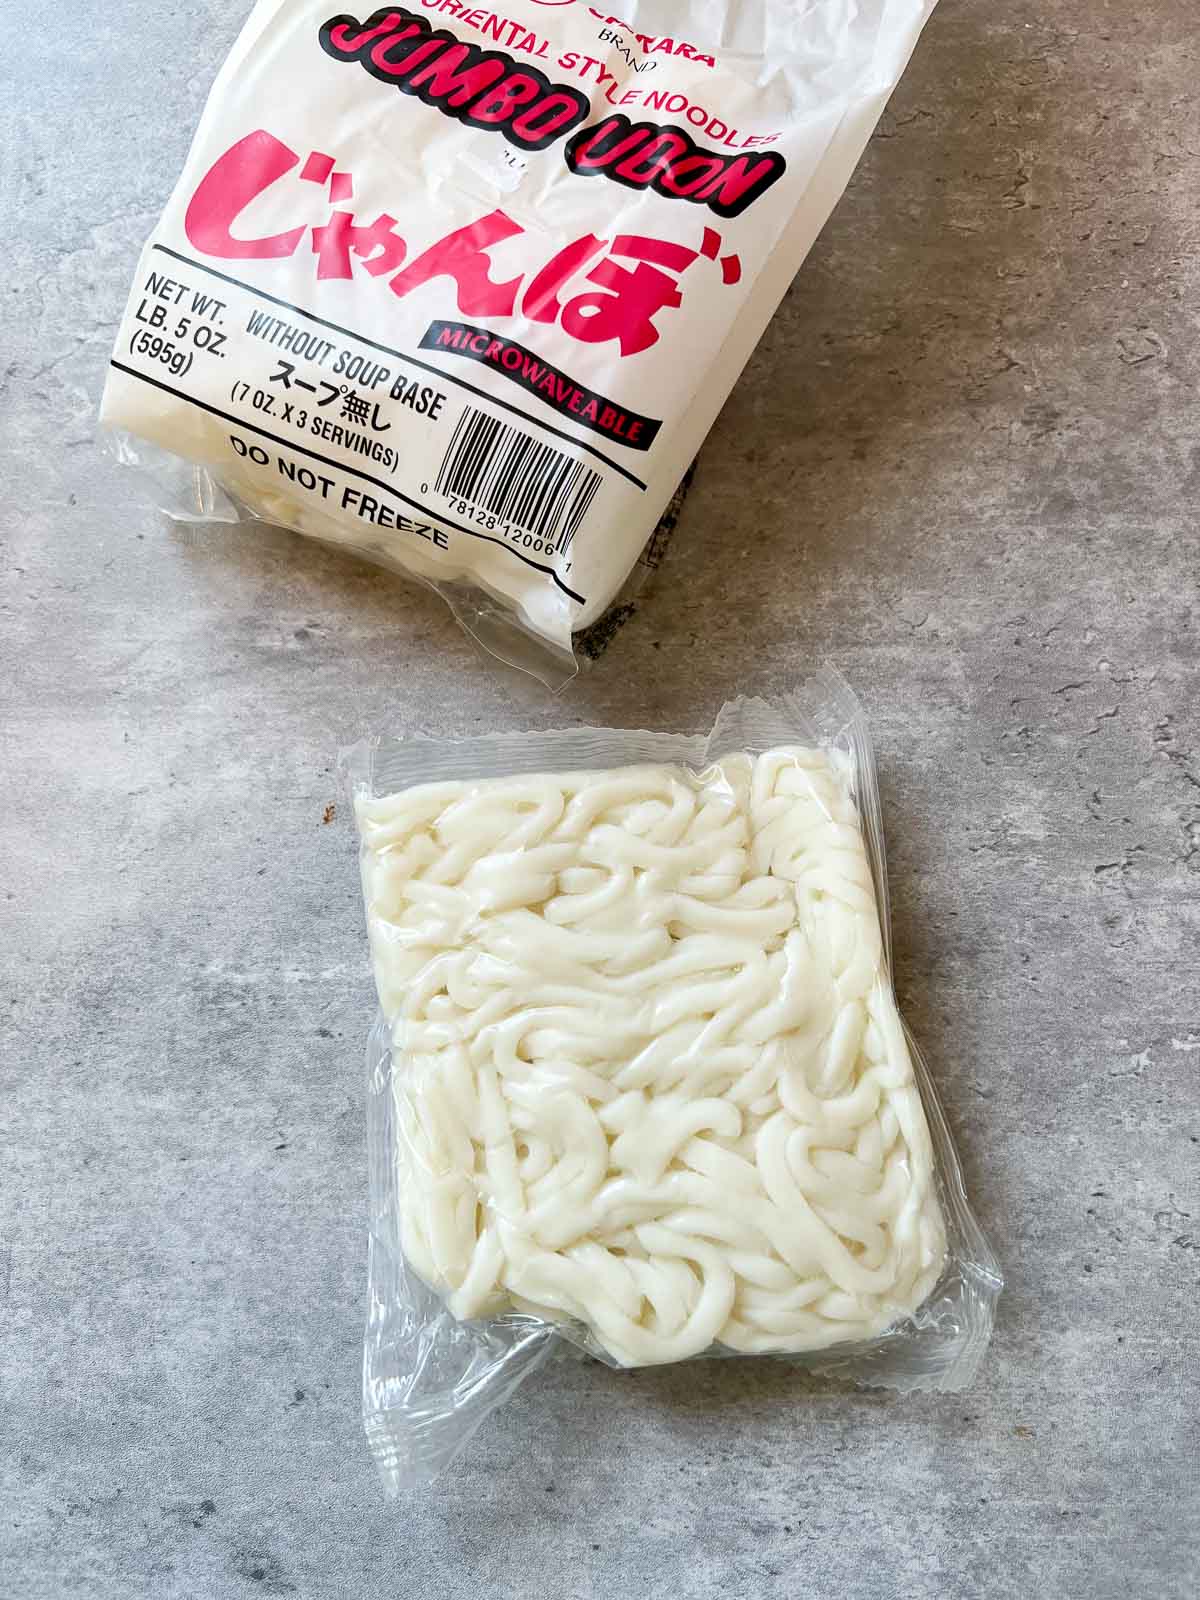 udon noodles in a package